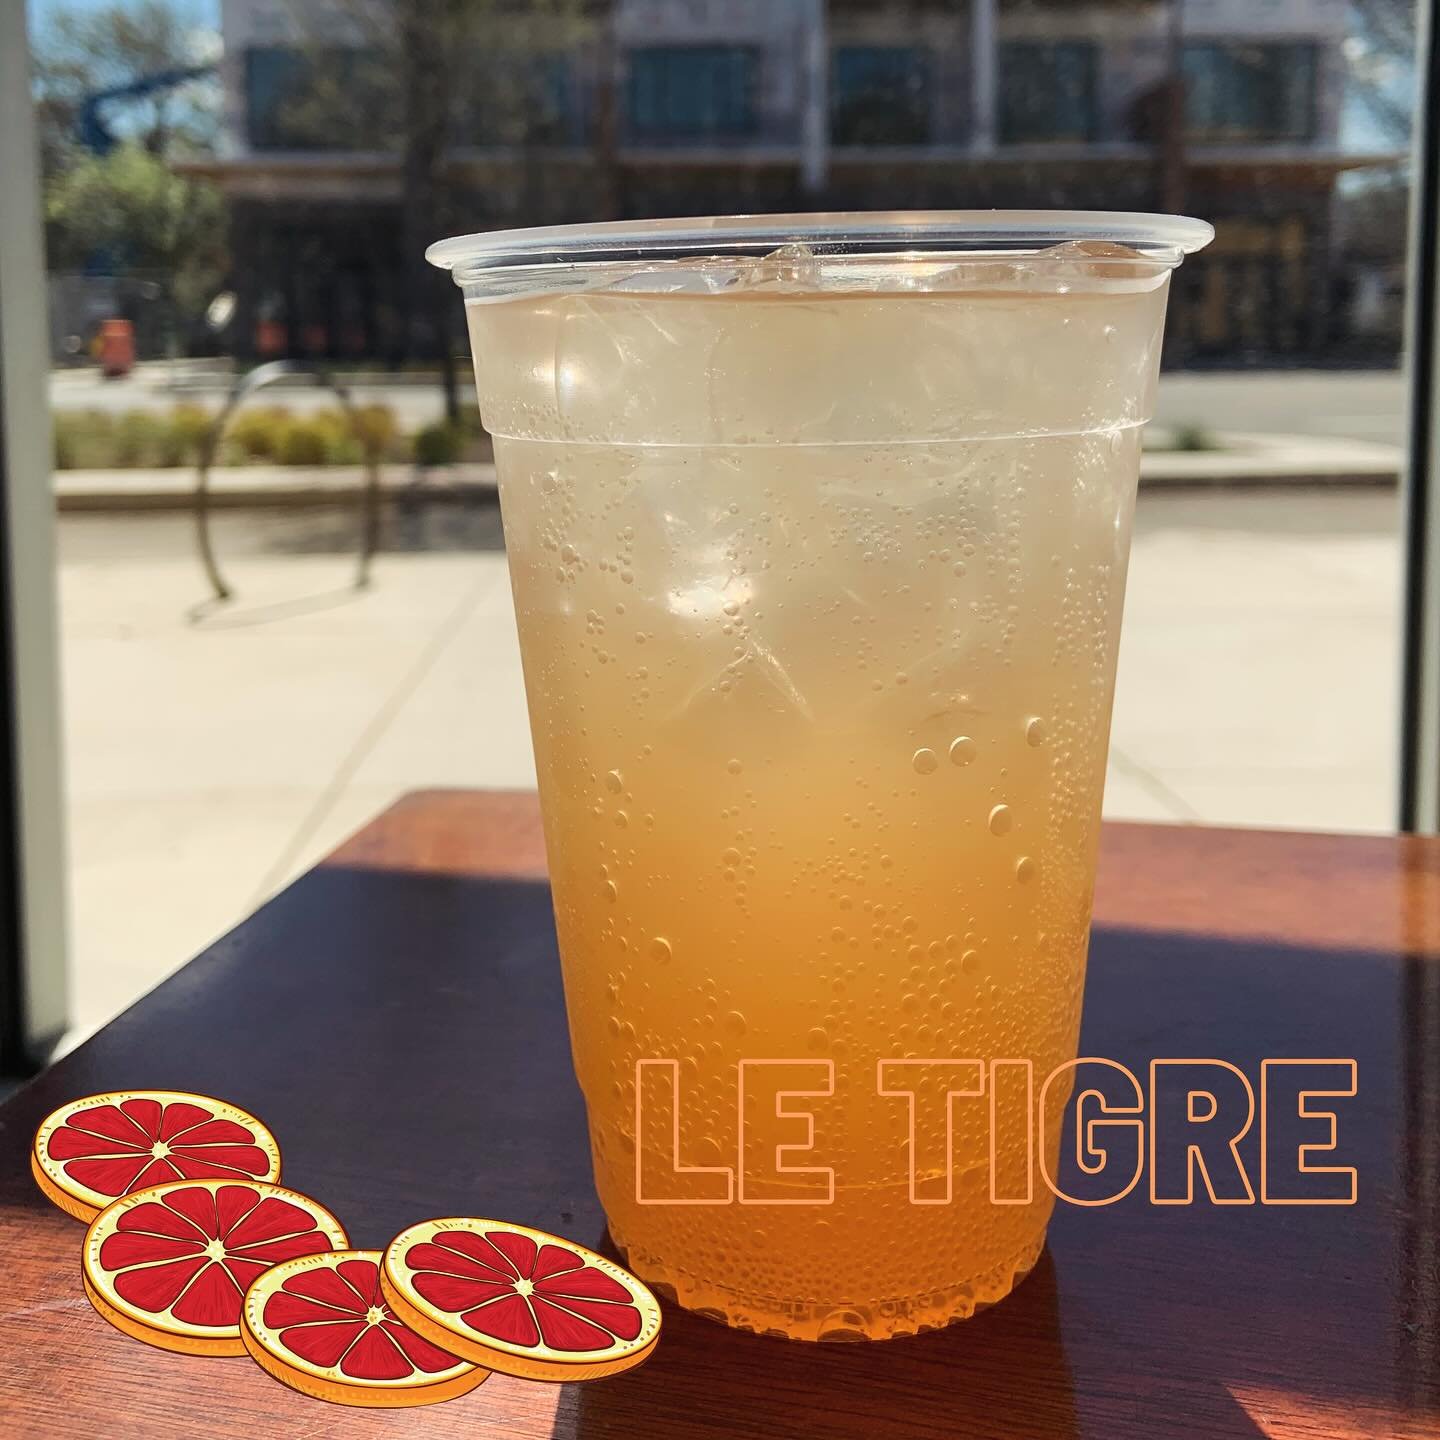 🥤NEW ITALIAN SODA FLAVOR DROP(S)!!🥤

🍒 The Kickback is a tart cherry concoction for your pre- and post- draft weekend activities 😋
🍊 Le Tigre is a delightful blood orange that dually celebrates queer culture and our own Detroit Tigers 😅

(This 